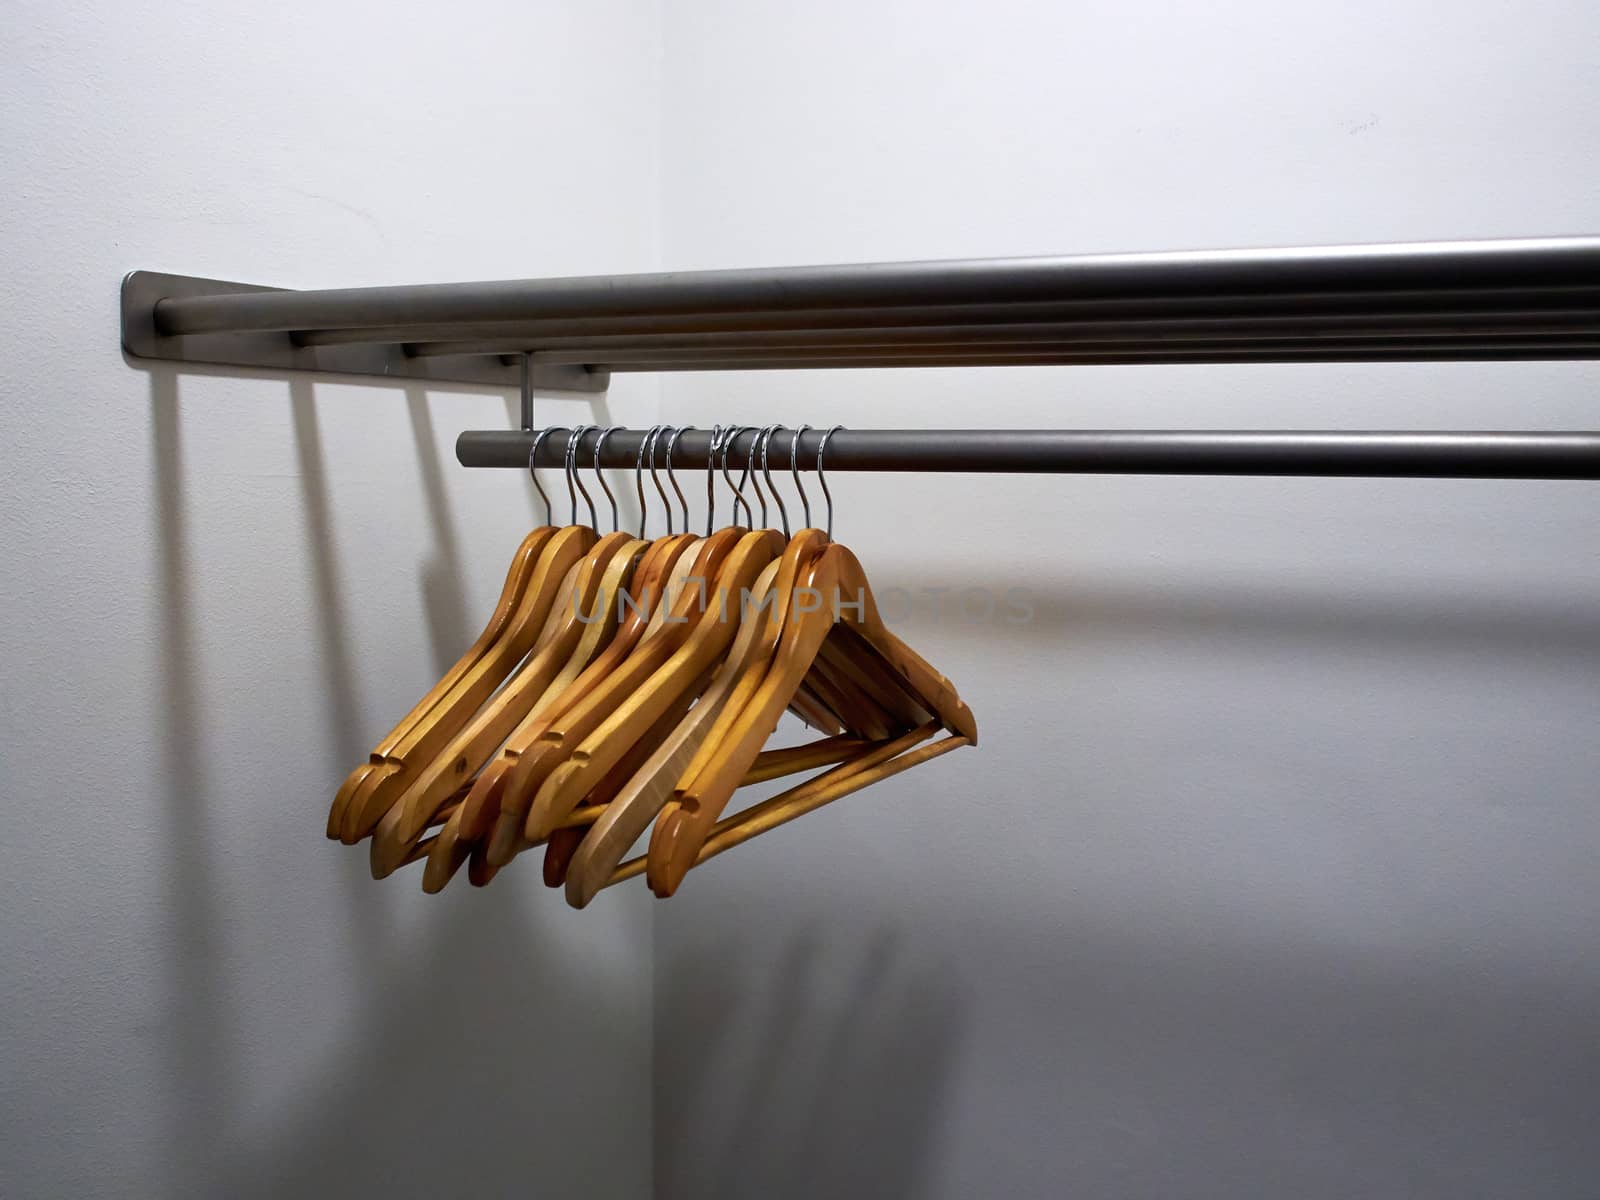 Wooden clothes hangers on a metal rack in a wardrobe dressing room